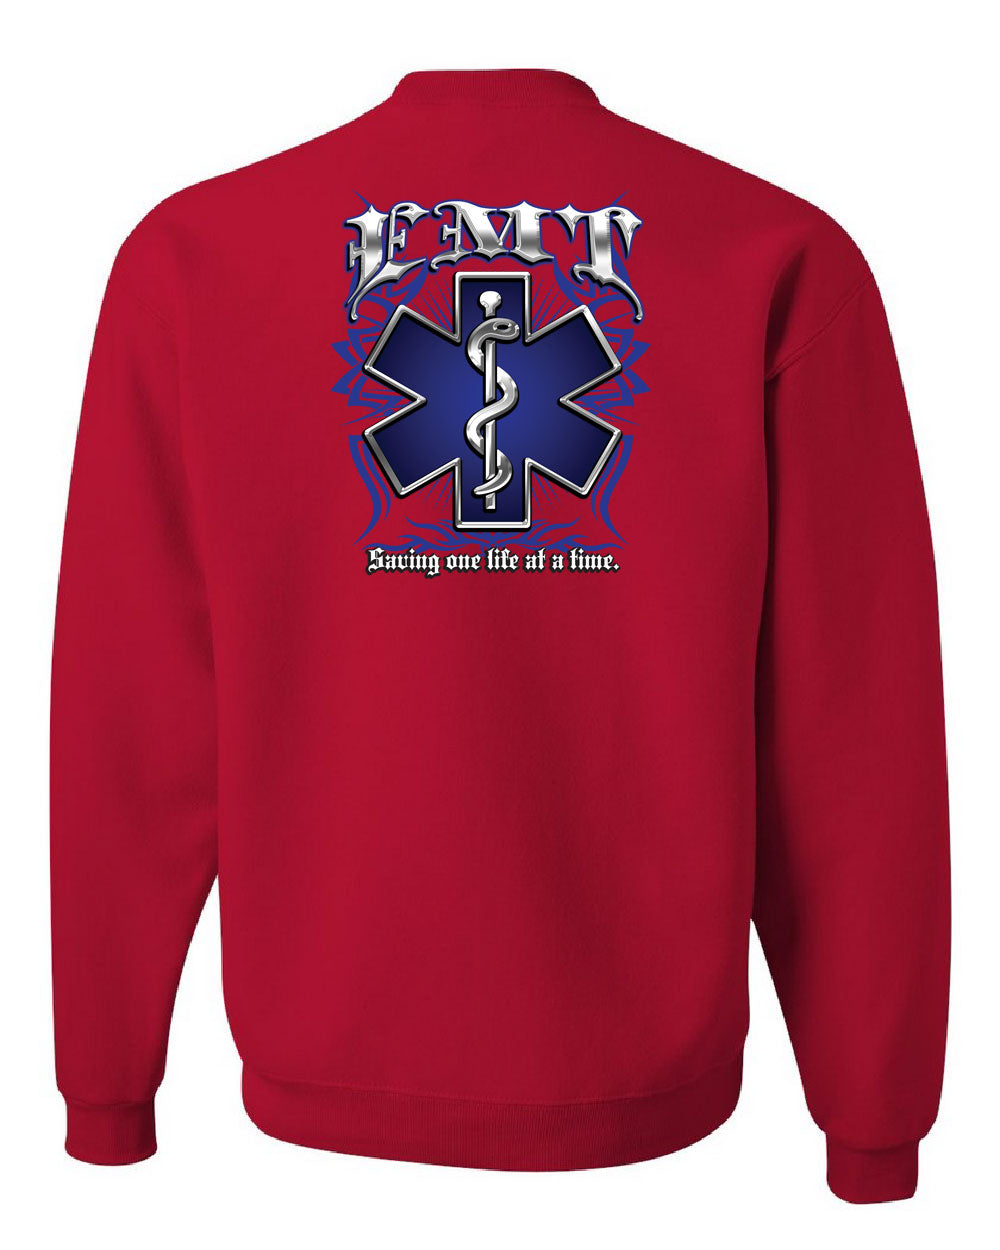 EMT Saving One Life at a Time Sweatshirt Paramedic First Responders ...